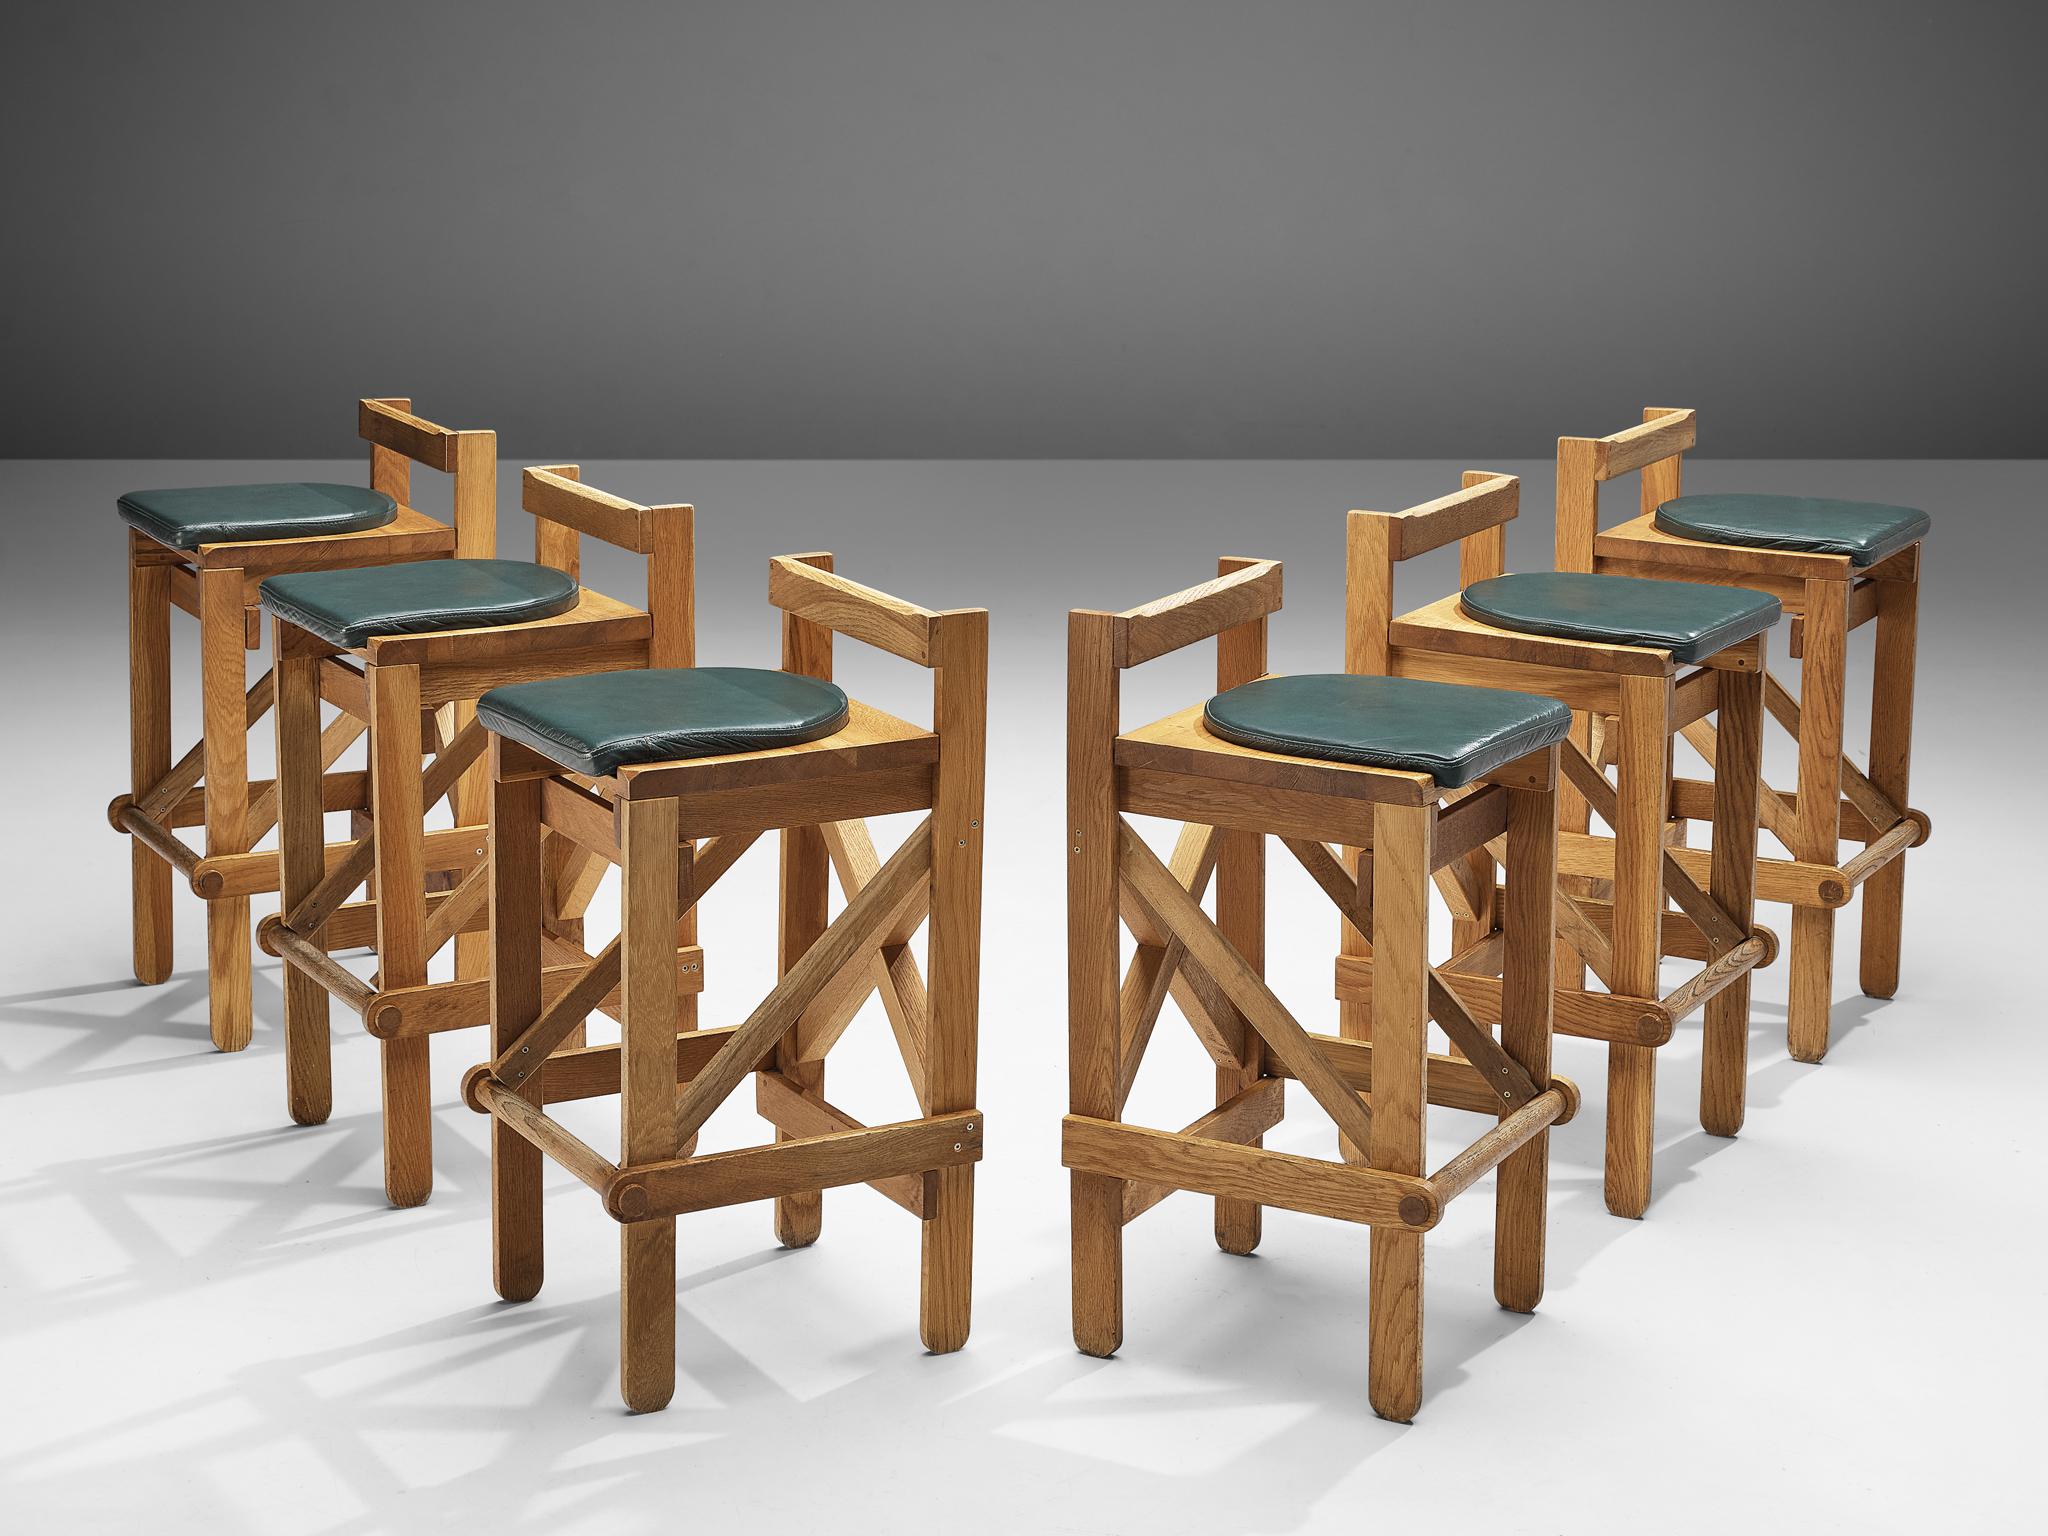 Bar stools, oak, France, 1960s

Sculptural yet natural bar stools in oak. These stools have a very elegant and complete design. Although the appearance is simplistic, all elements of a proper barstool are present. The frame with four legs shows